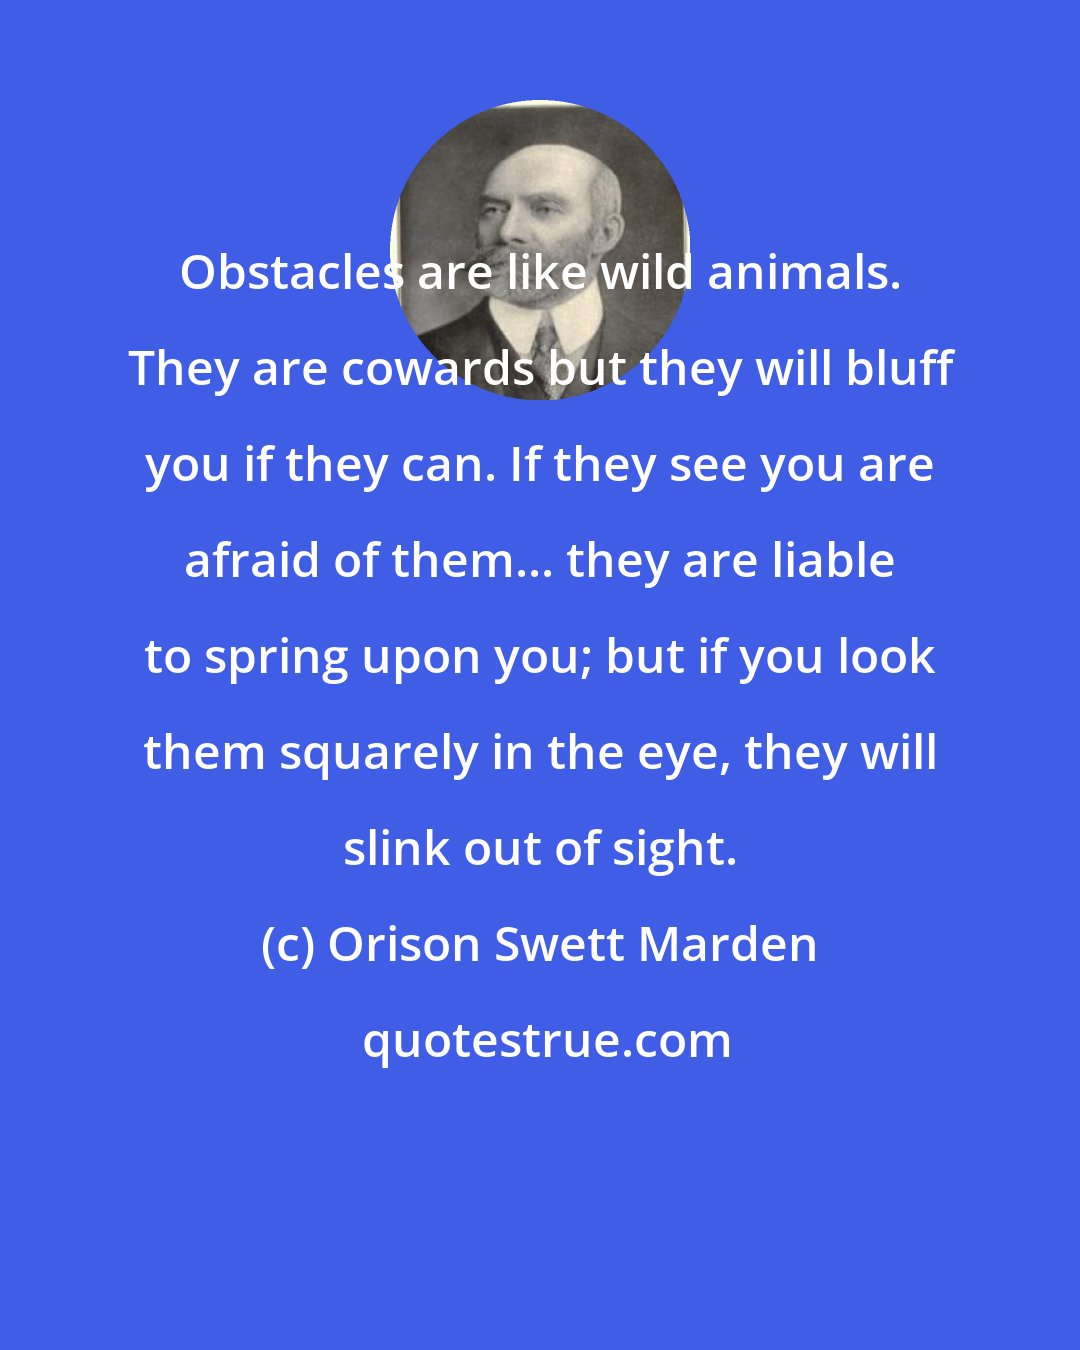 Orison Swett Marden: Obstacles are like wild animals. They are cowards but they will bluff you if they can. If they see you are afraid of them... they are liable to spring upon you; but if you look them squarely in the eye, they will slink out of sight.